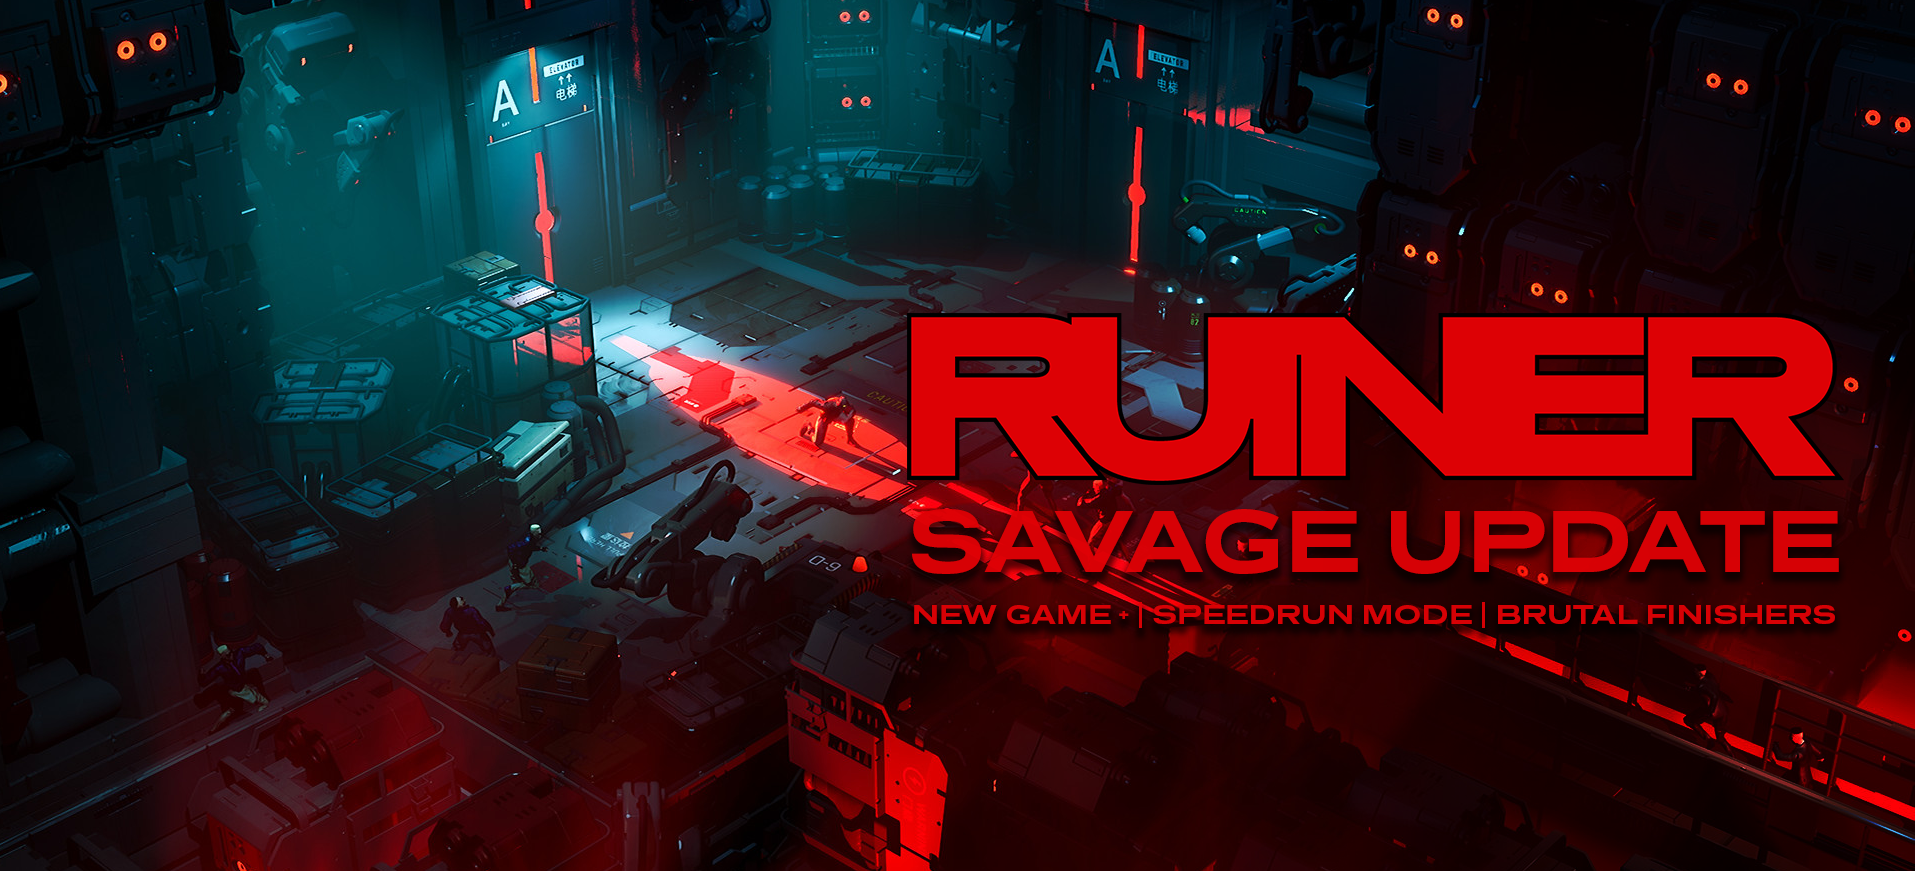 Ruiner’s "Savage Update" Adds New Game Modes Weapons etc